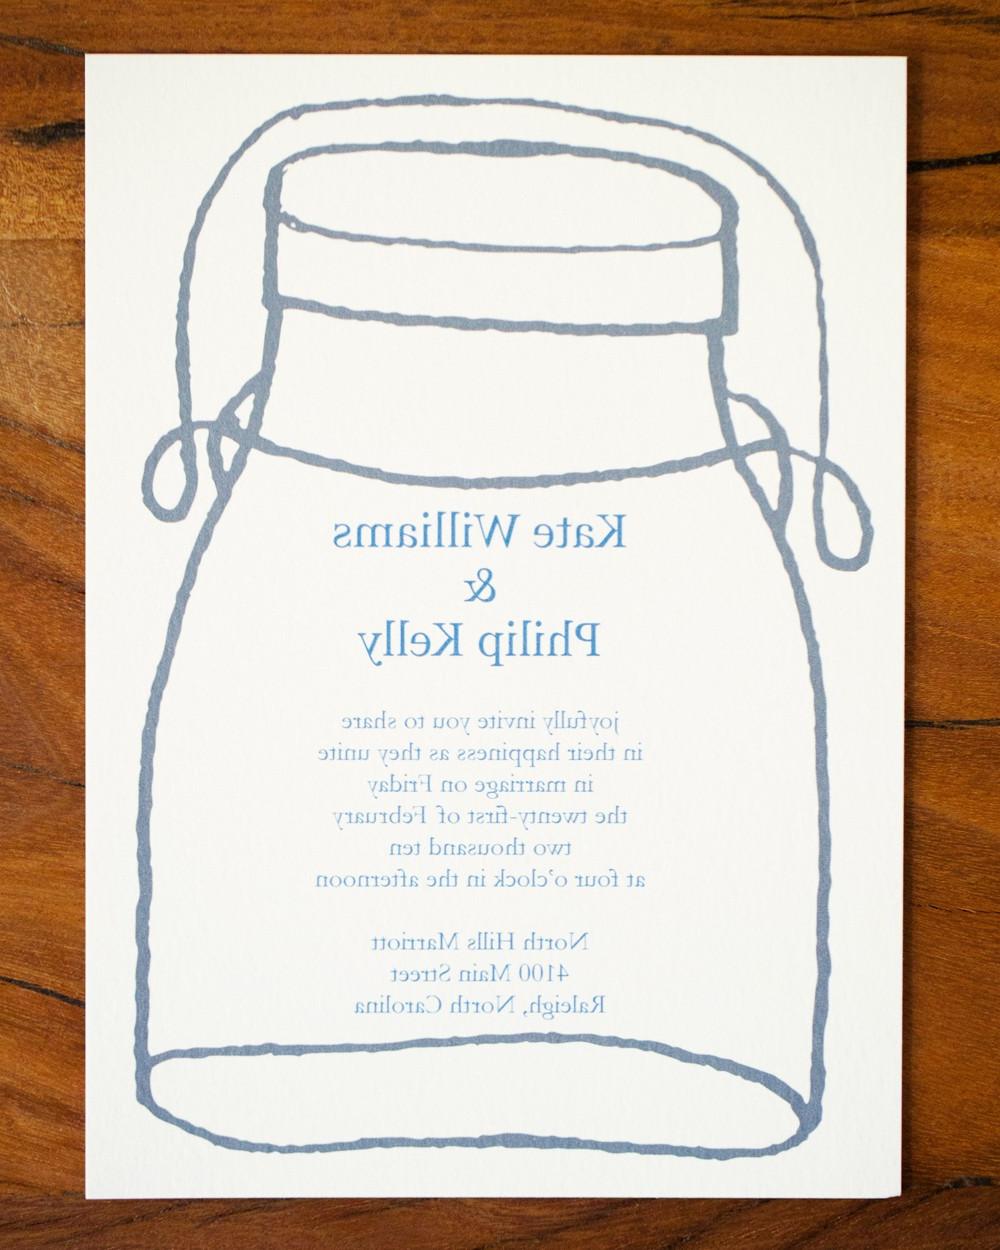 Mason Jar Invite & RSVP. Double click on above image to view full picture